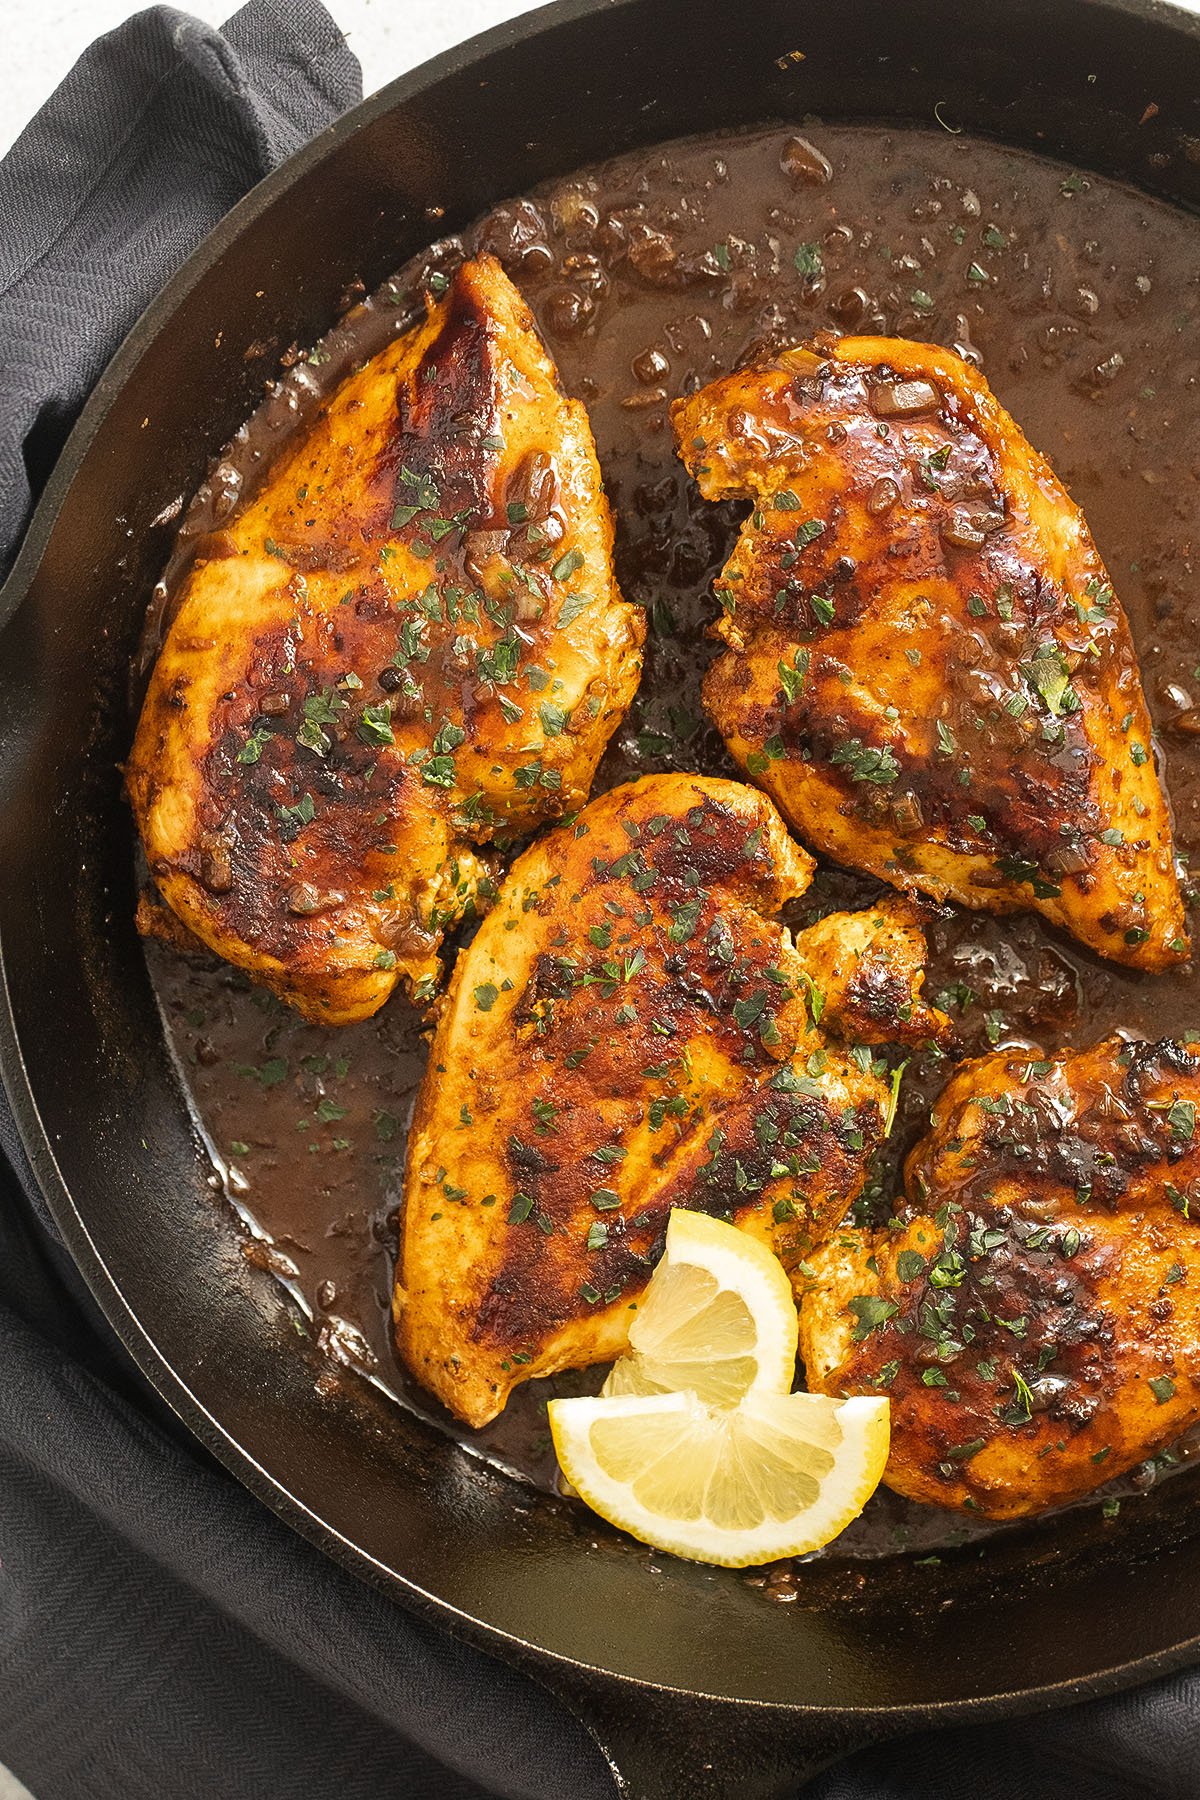 four golden brown chicken breasts sauteed in a cast iron skillet.